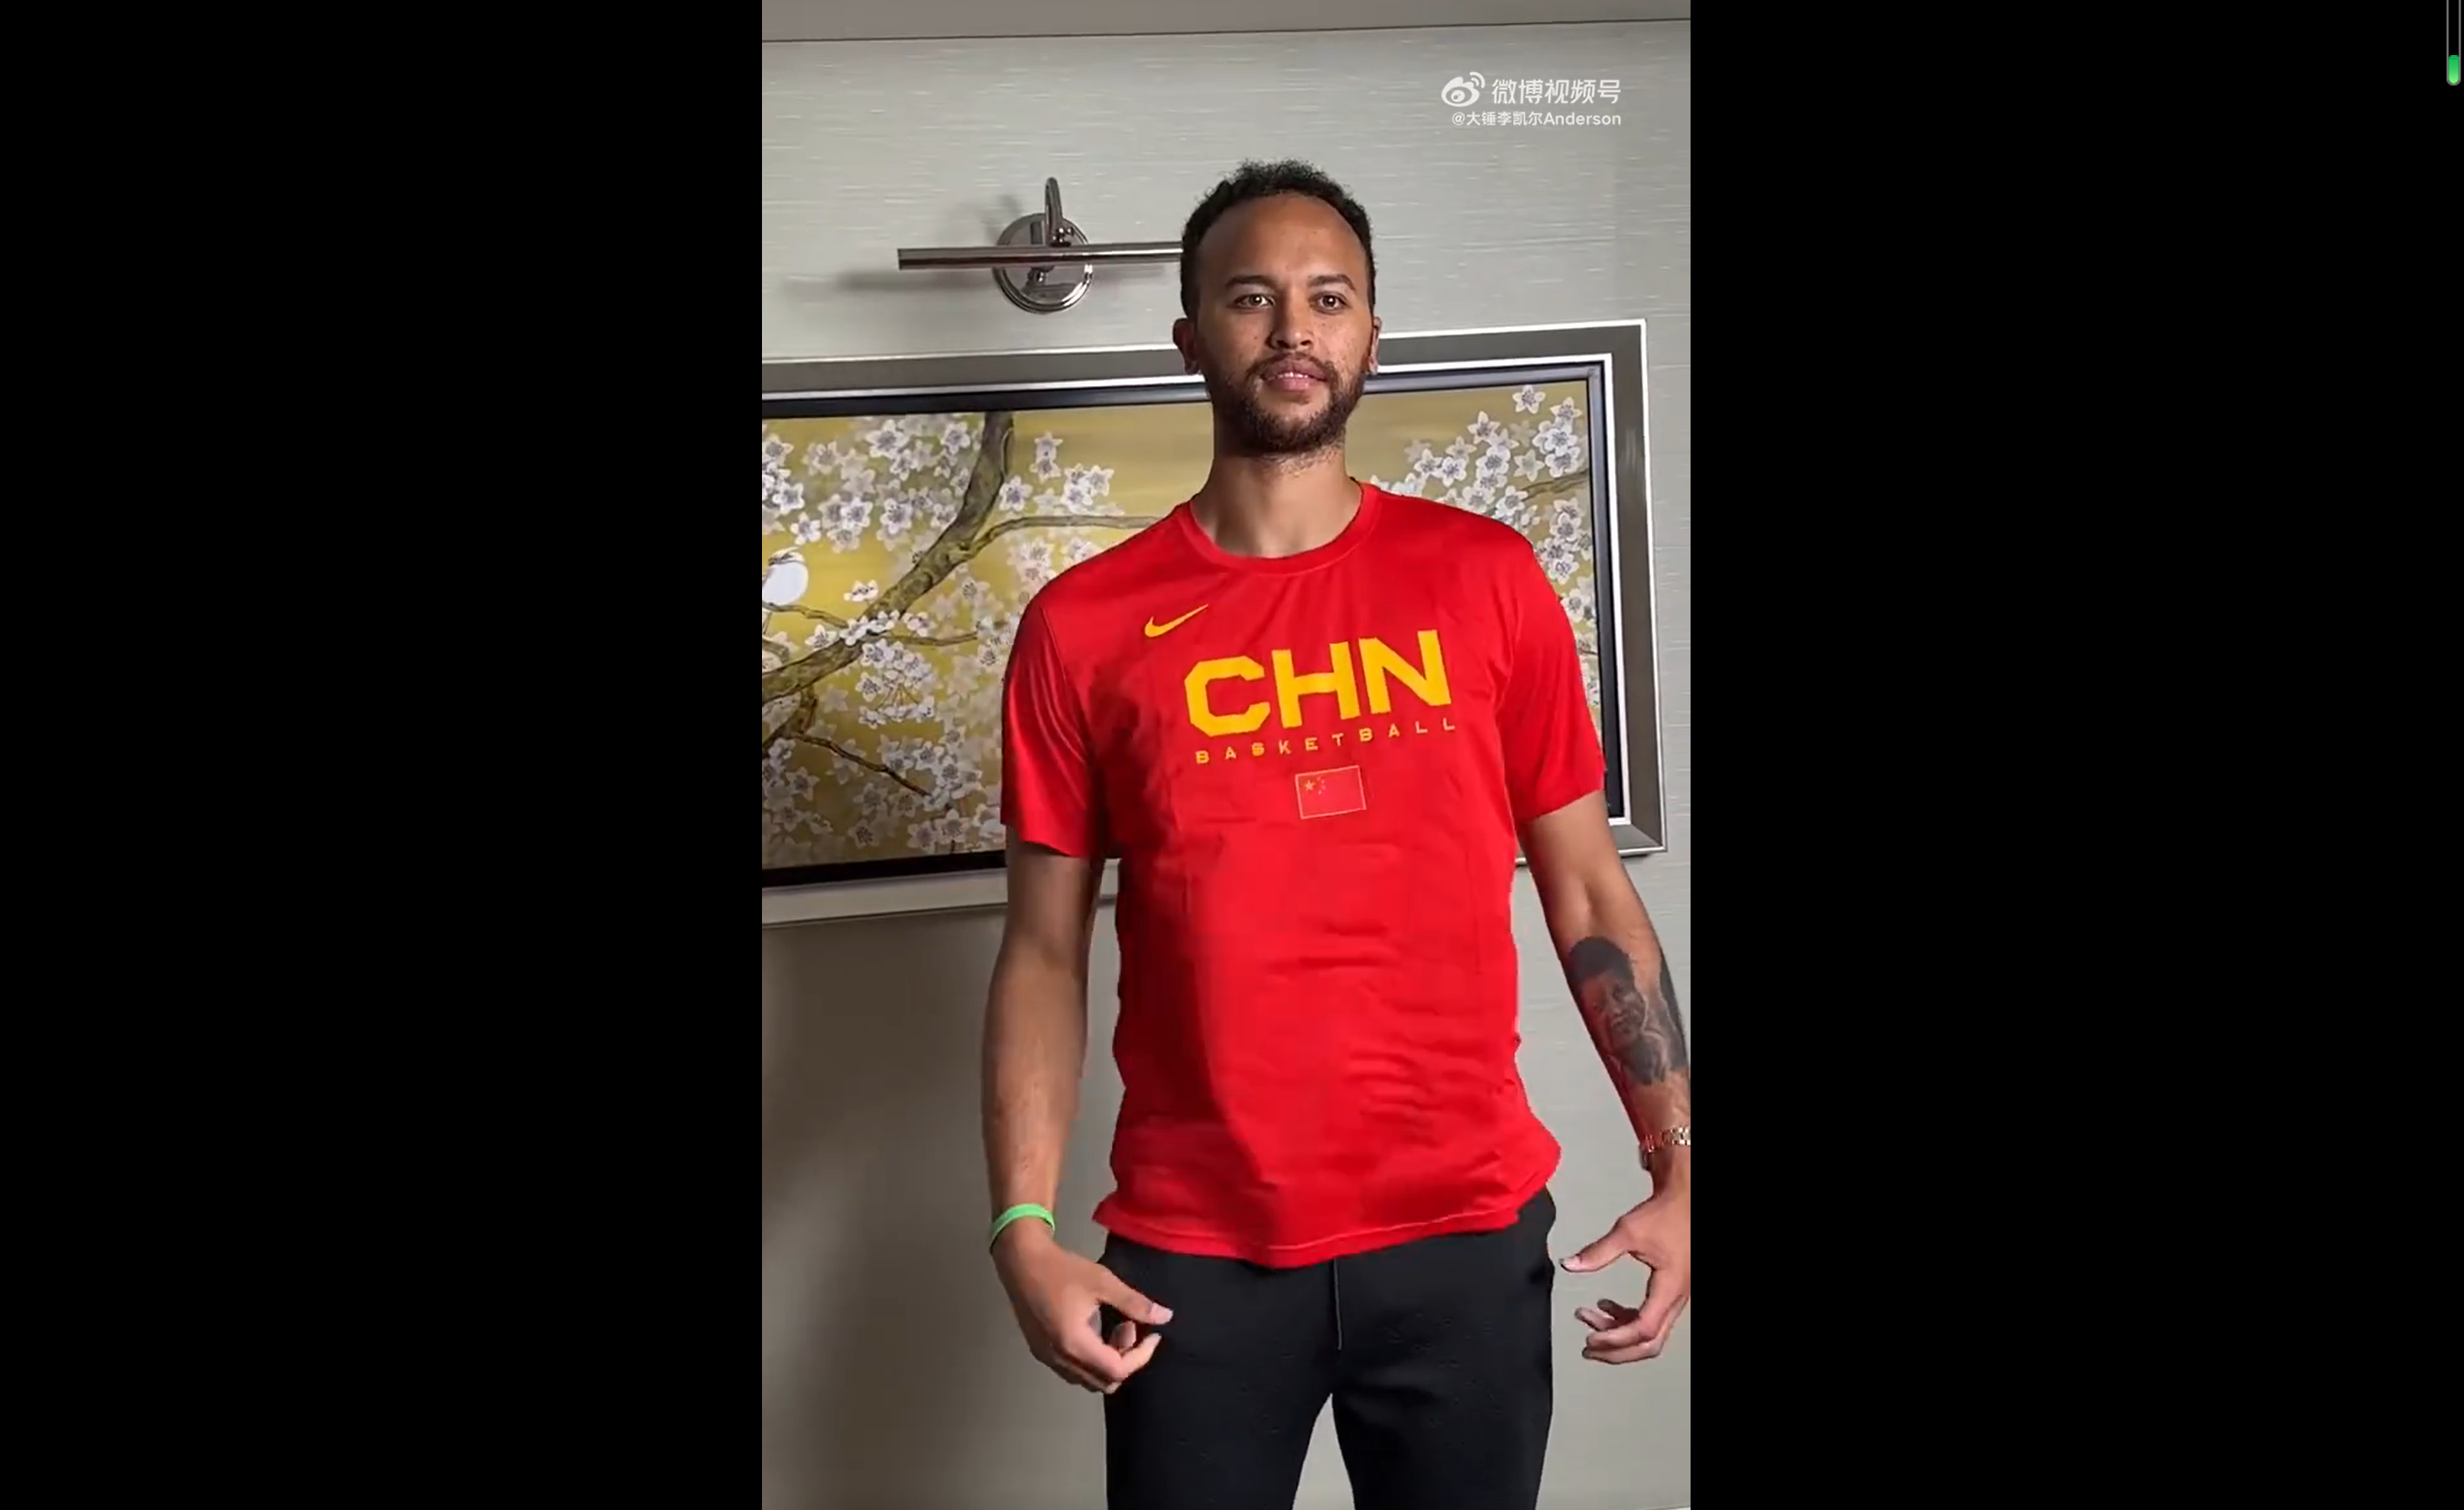 Kyle Anderson of China wears jersey that says 